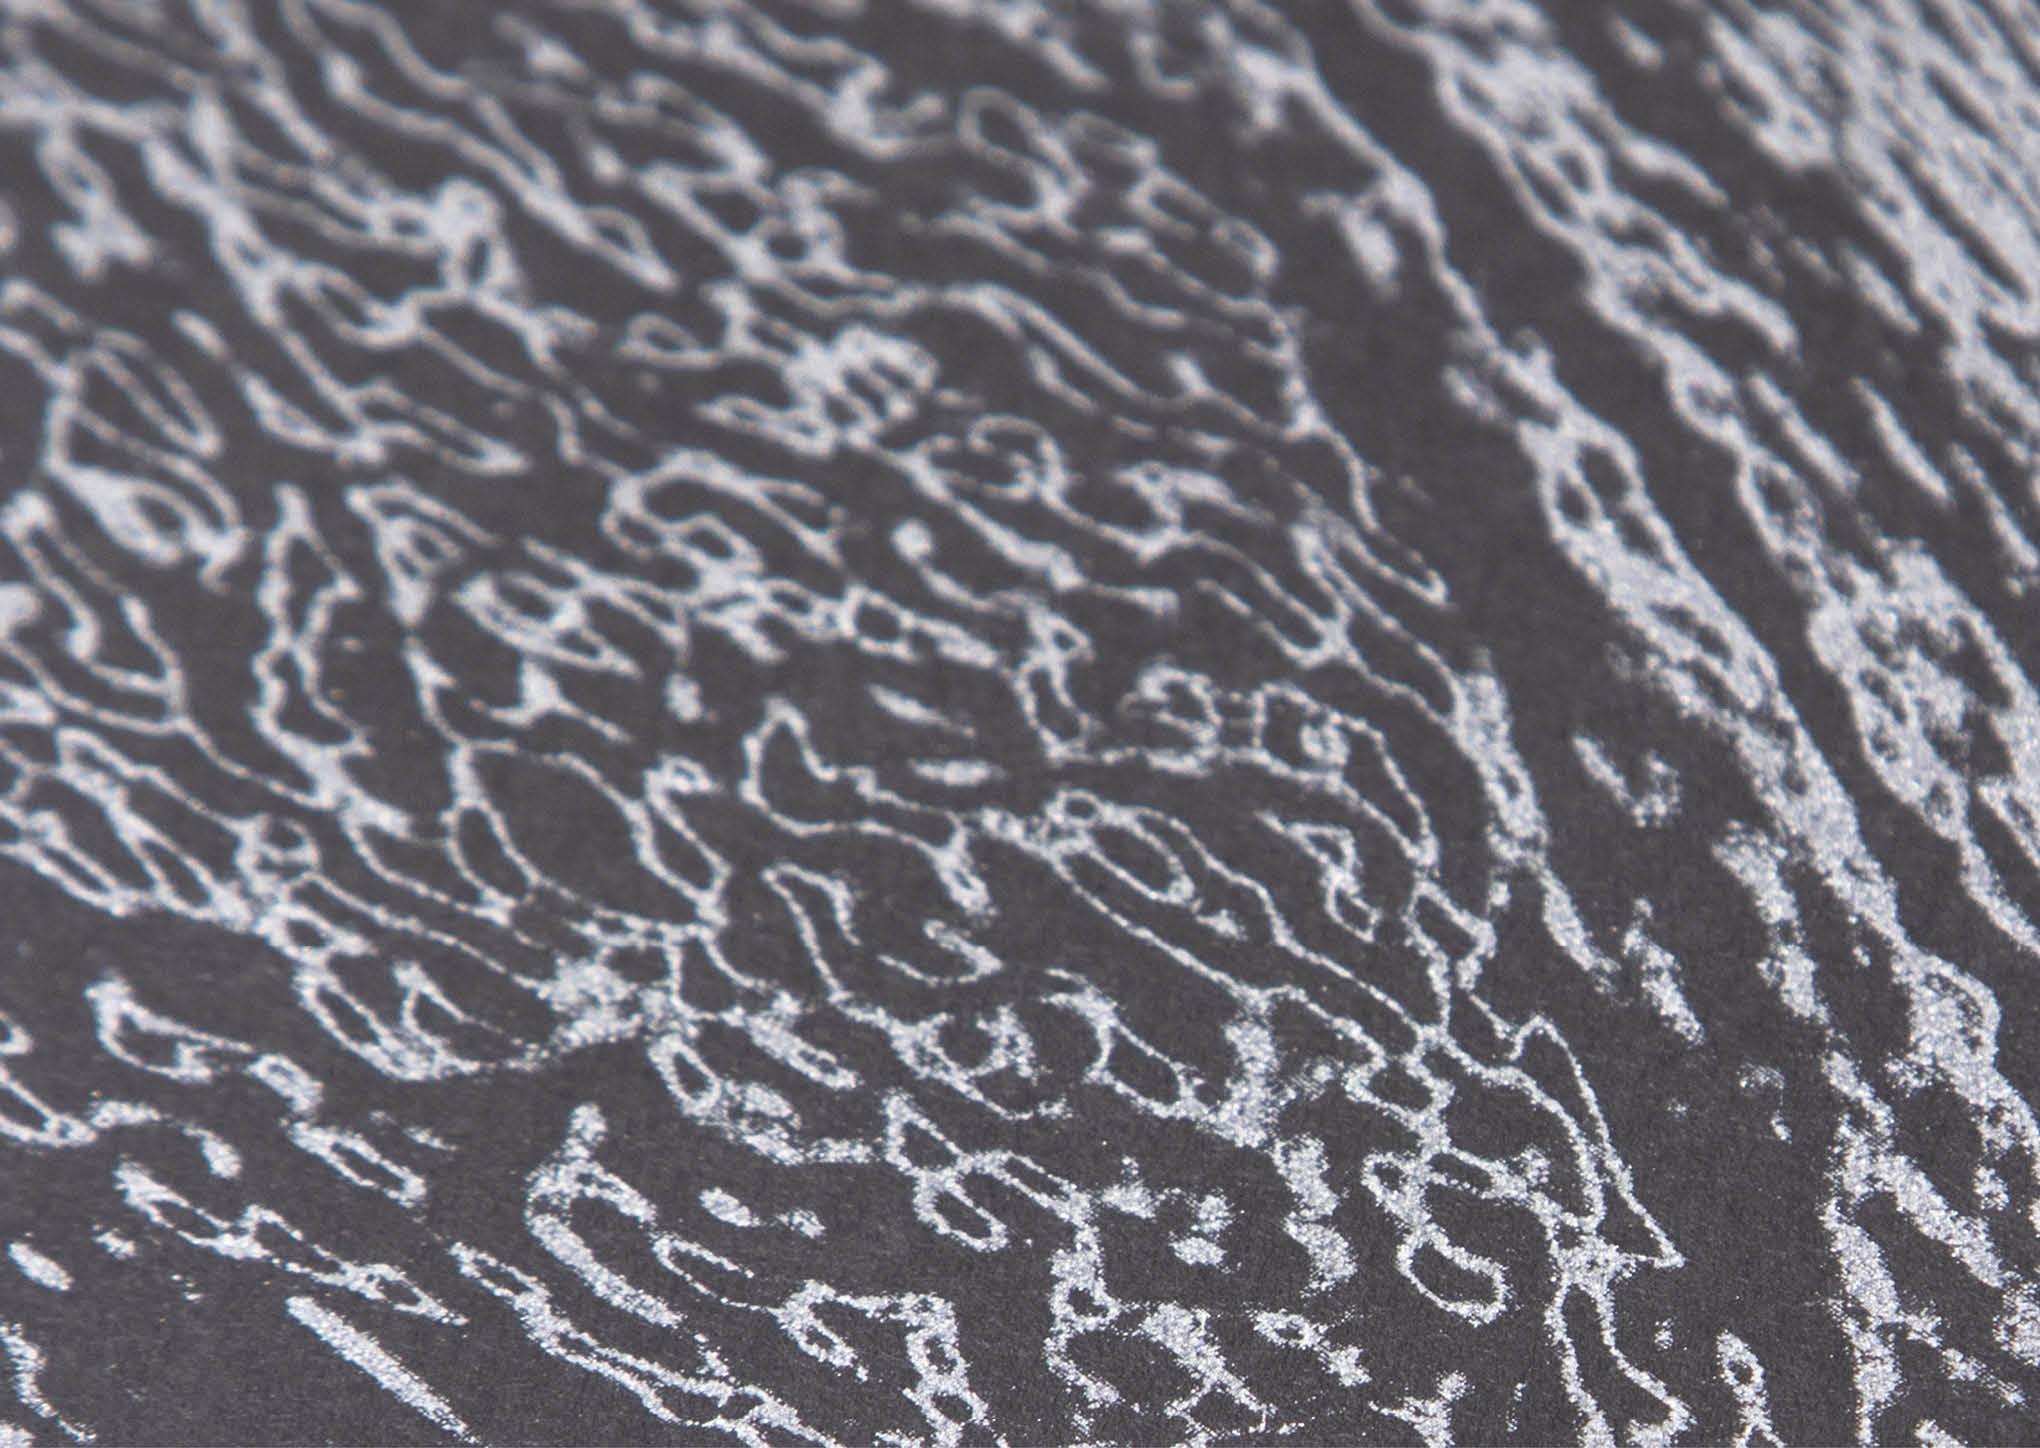 The print and the silver color used created such interesting details in the image.